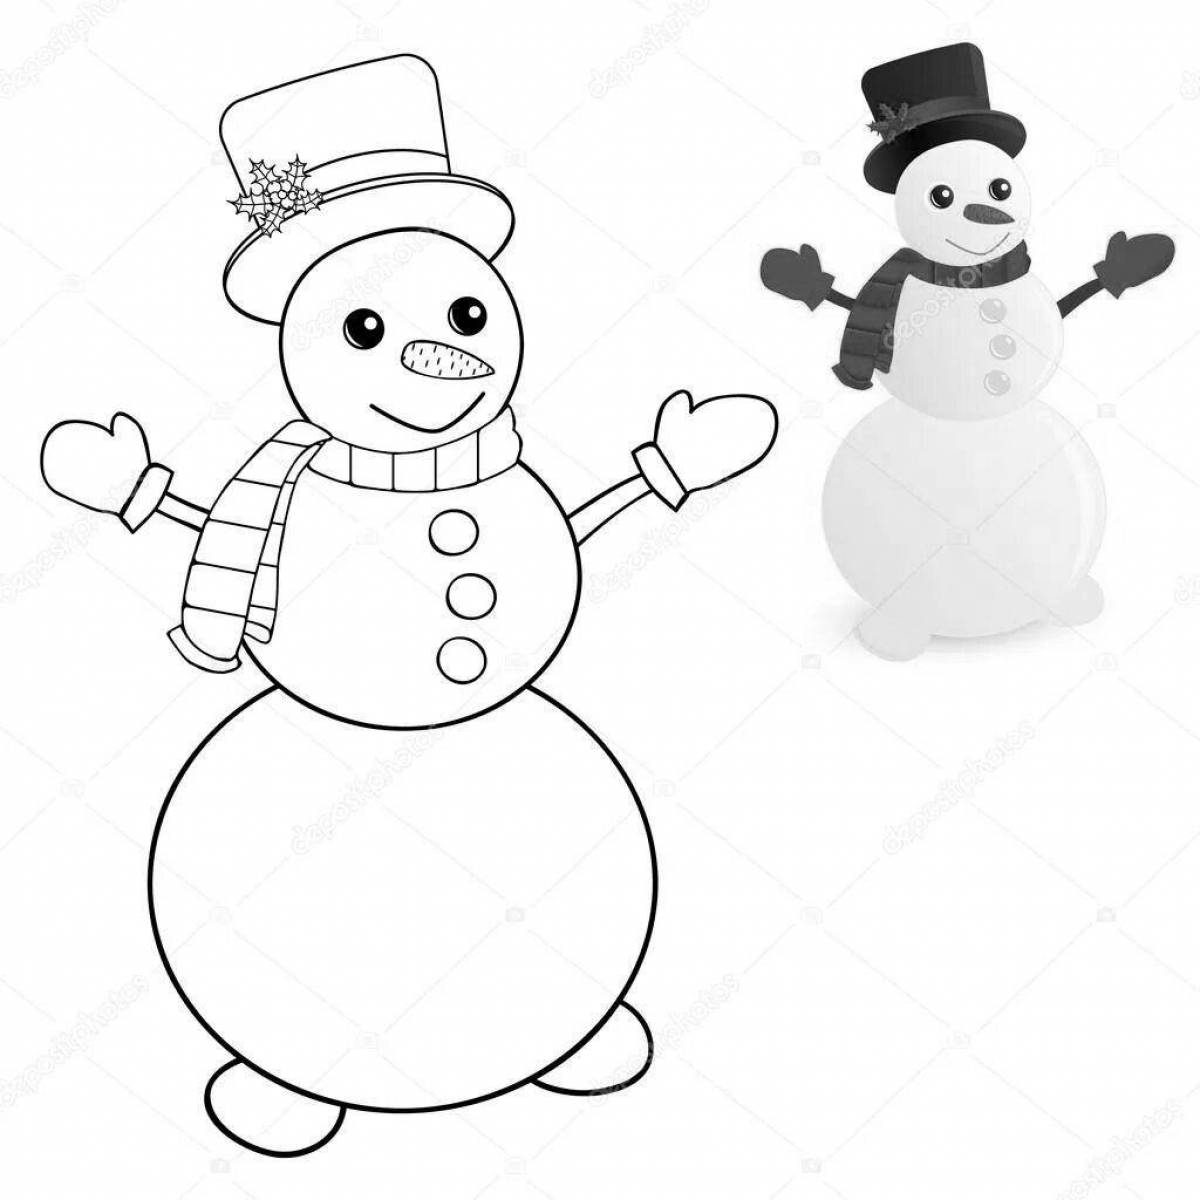 Vivacious coloring page funny snowman for kids